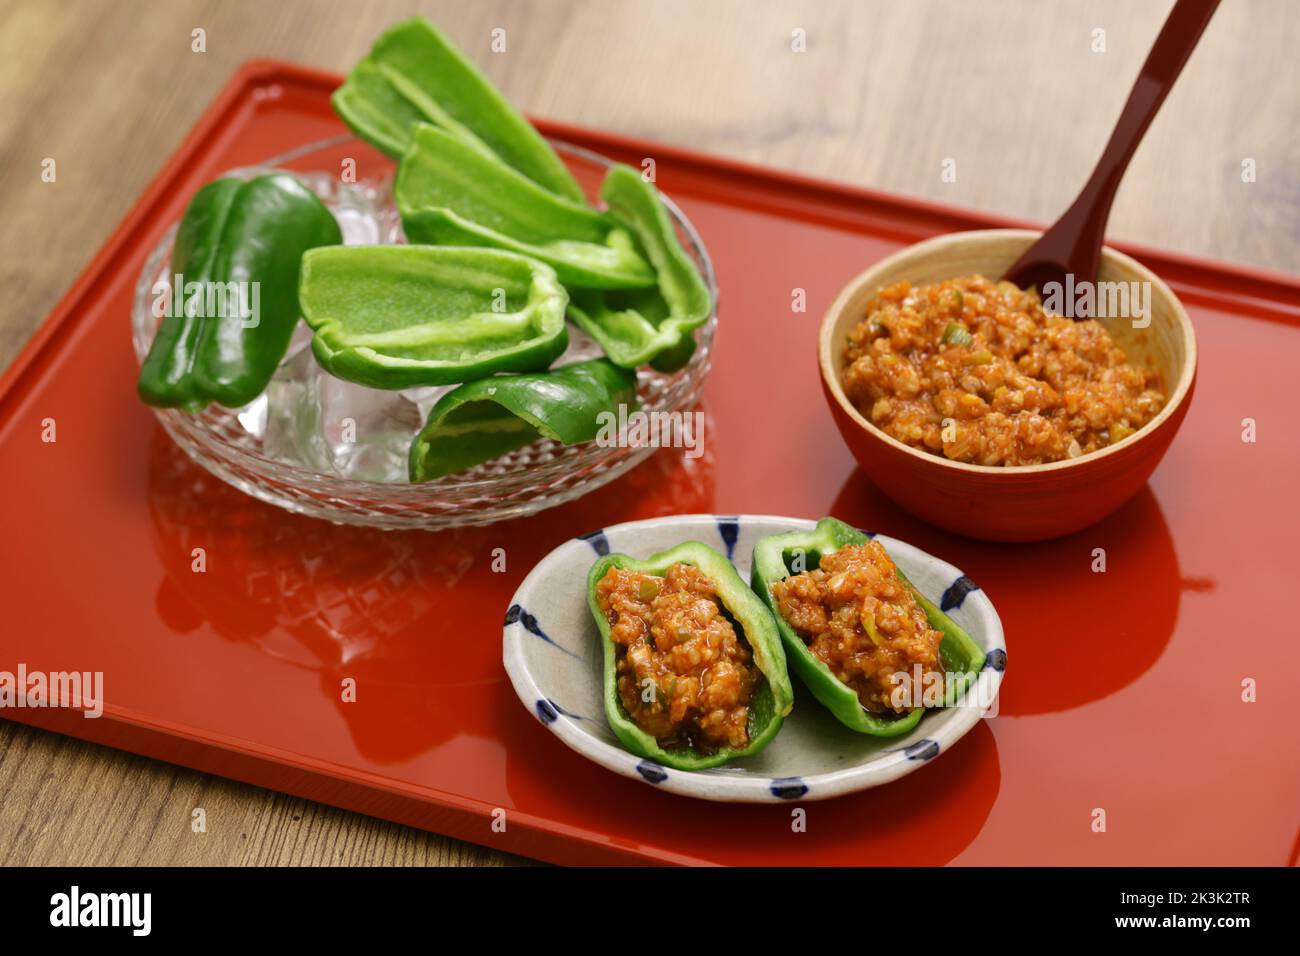 fresh green peppers(chilled in ice water) and Niku Miso (ground pork miso dip), a Japanese tavern appetizer Stock Photo